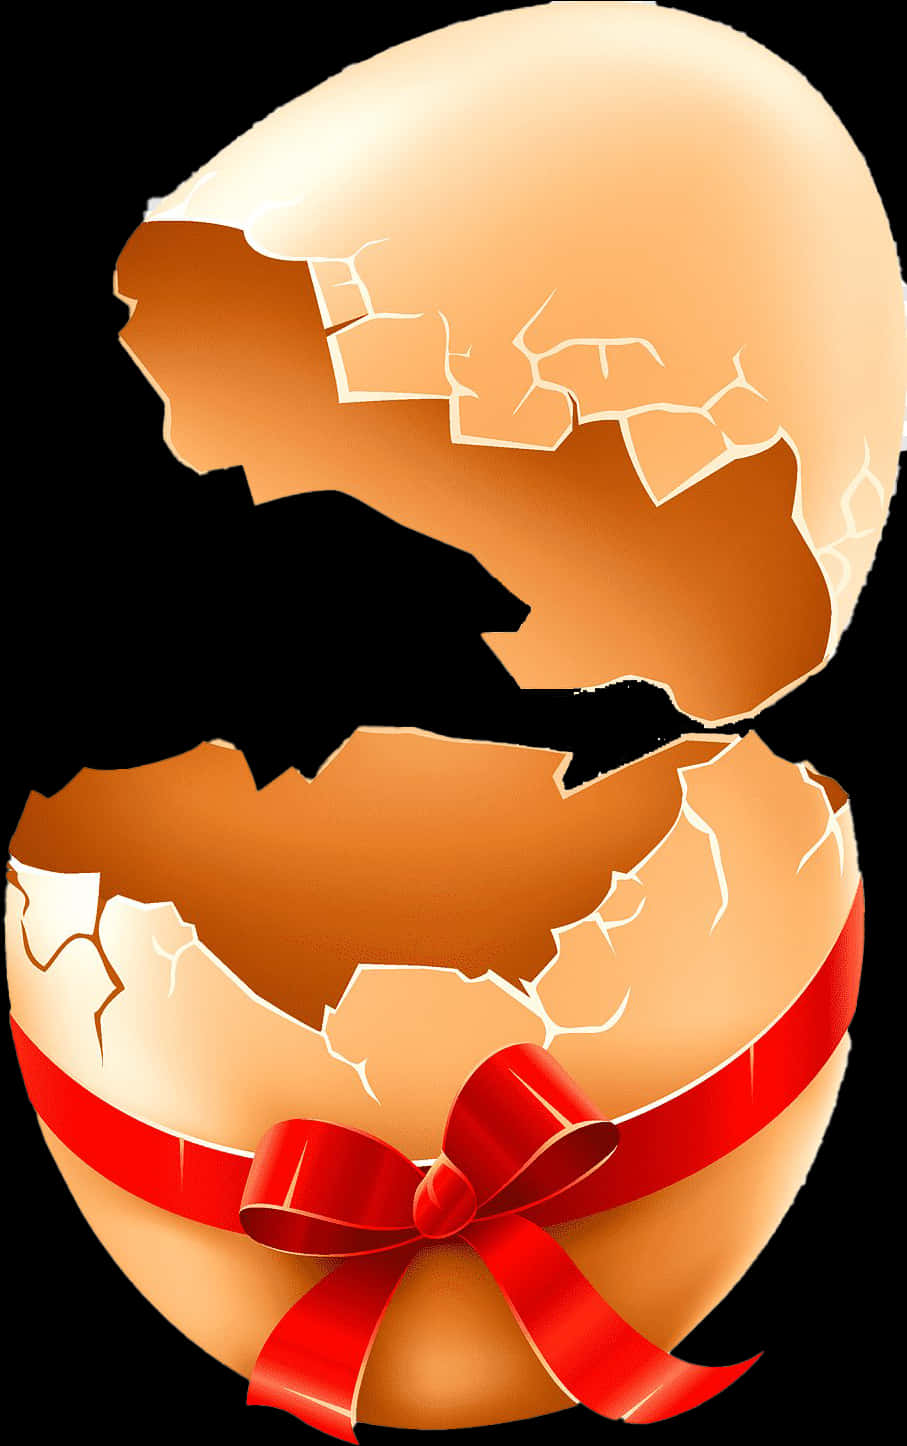 A Broken Egg With A Red Ribbon